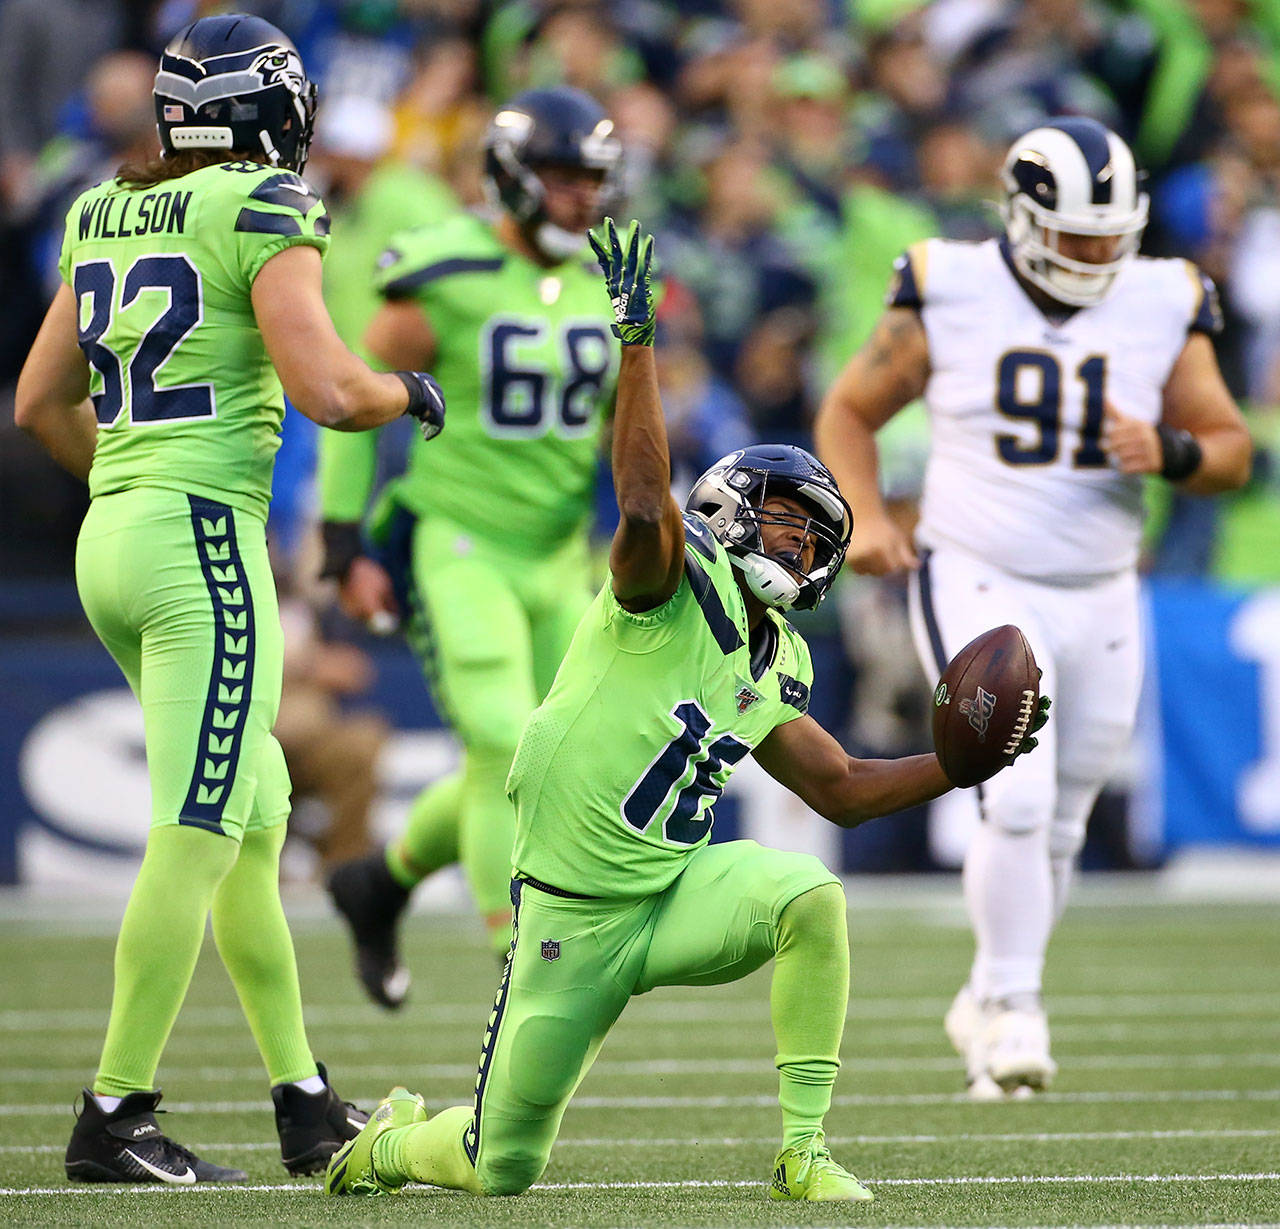 Seattle’s Tyler Lockett celebrates a first down during the Seahawks 30-29 win over the L.A. Rams on Thursday at CenturyLink Field in Seattle. (Kevin Clark / The Herald)